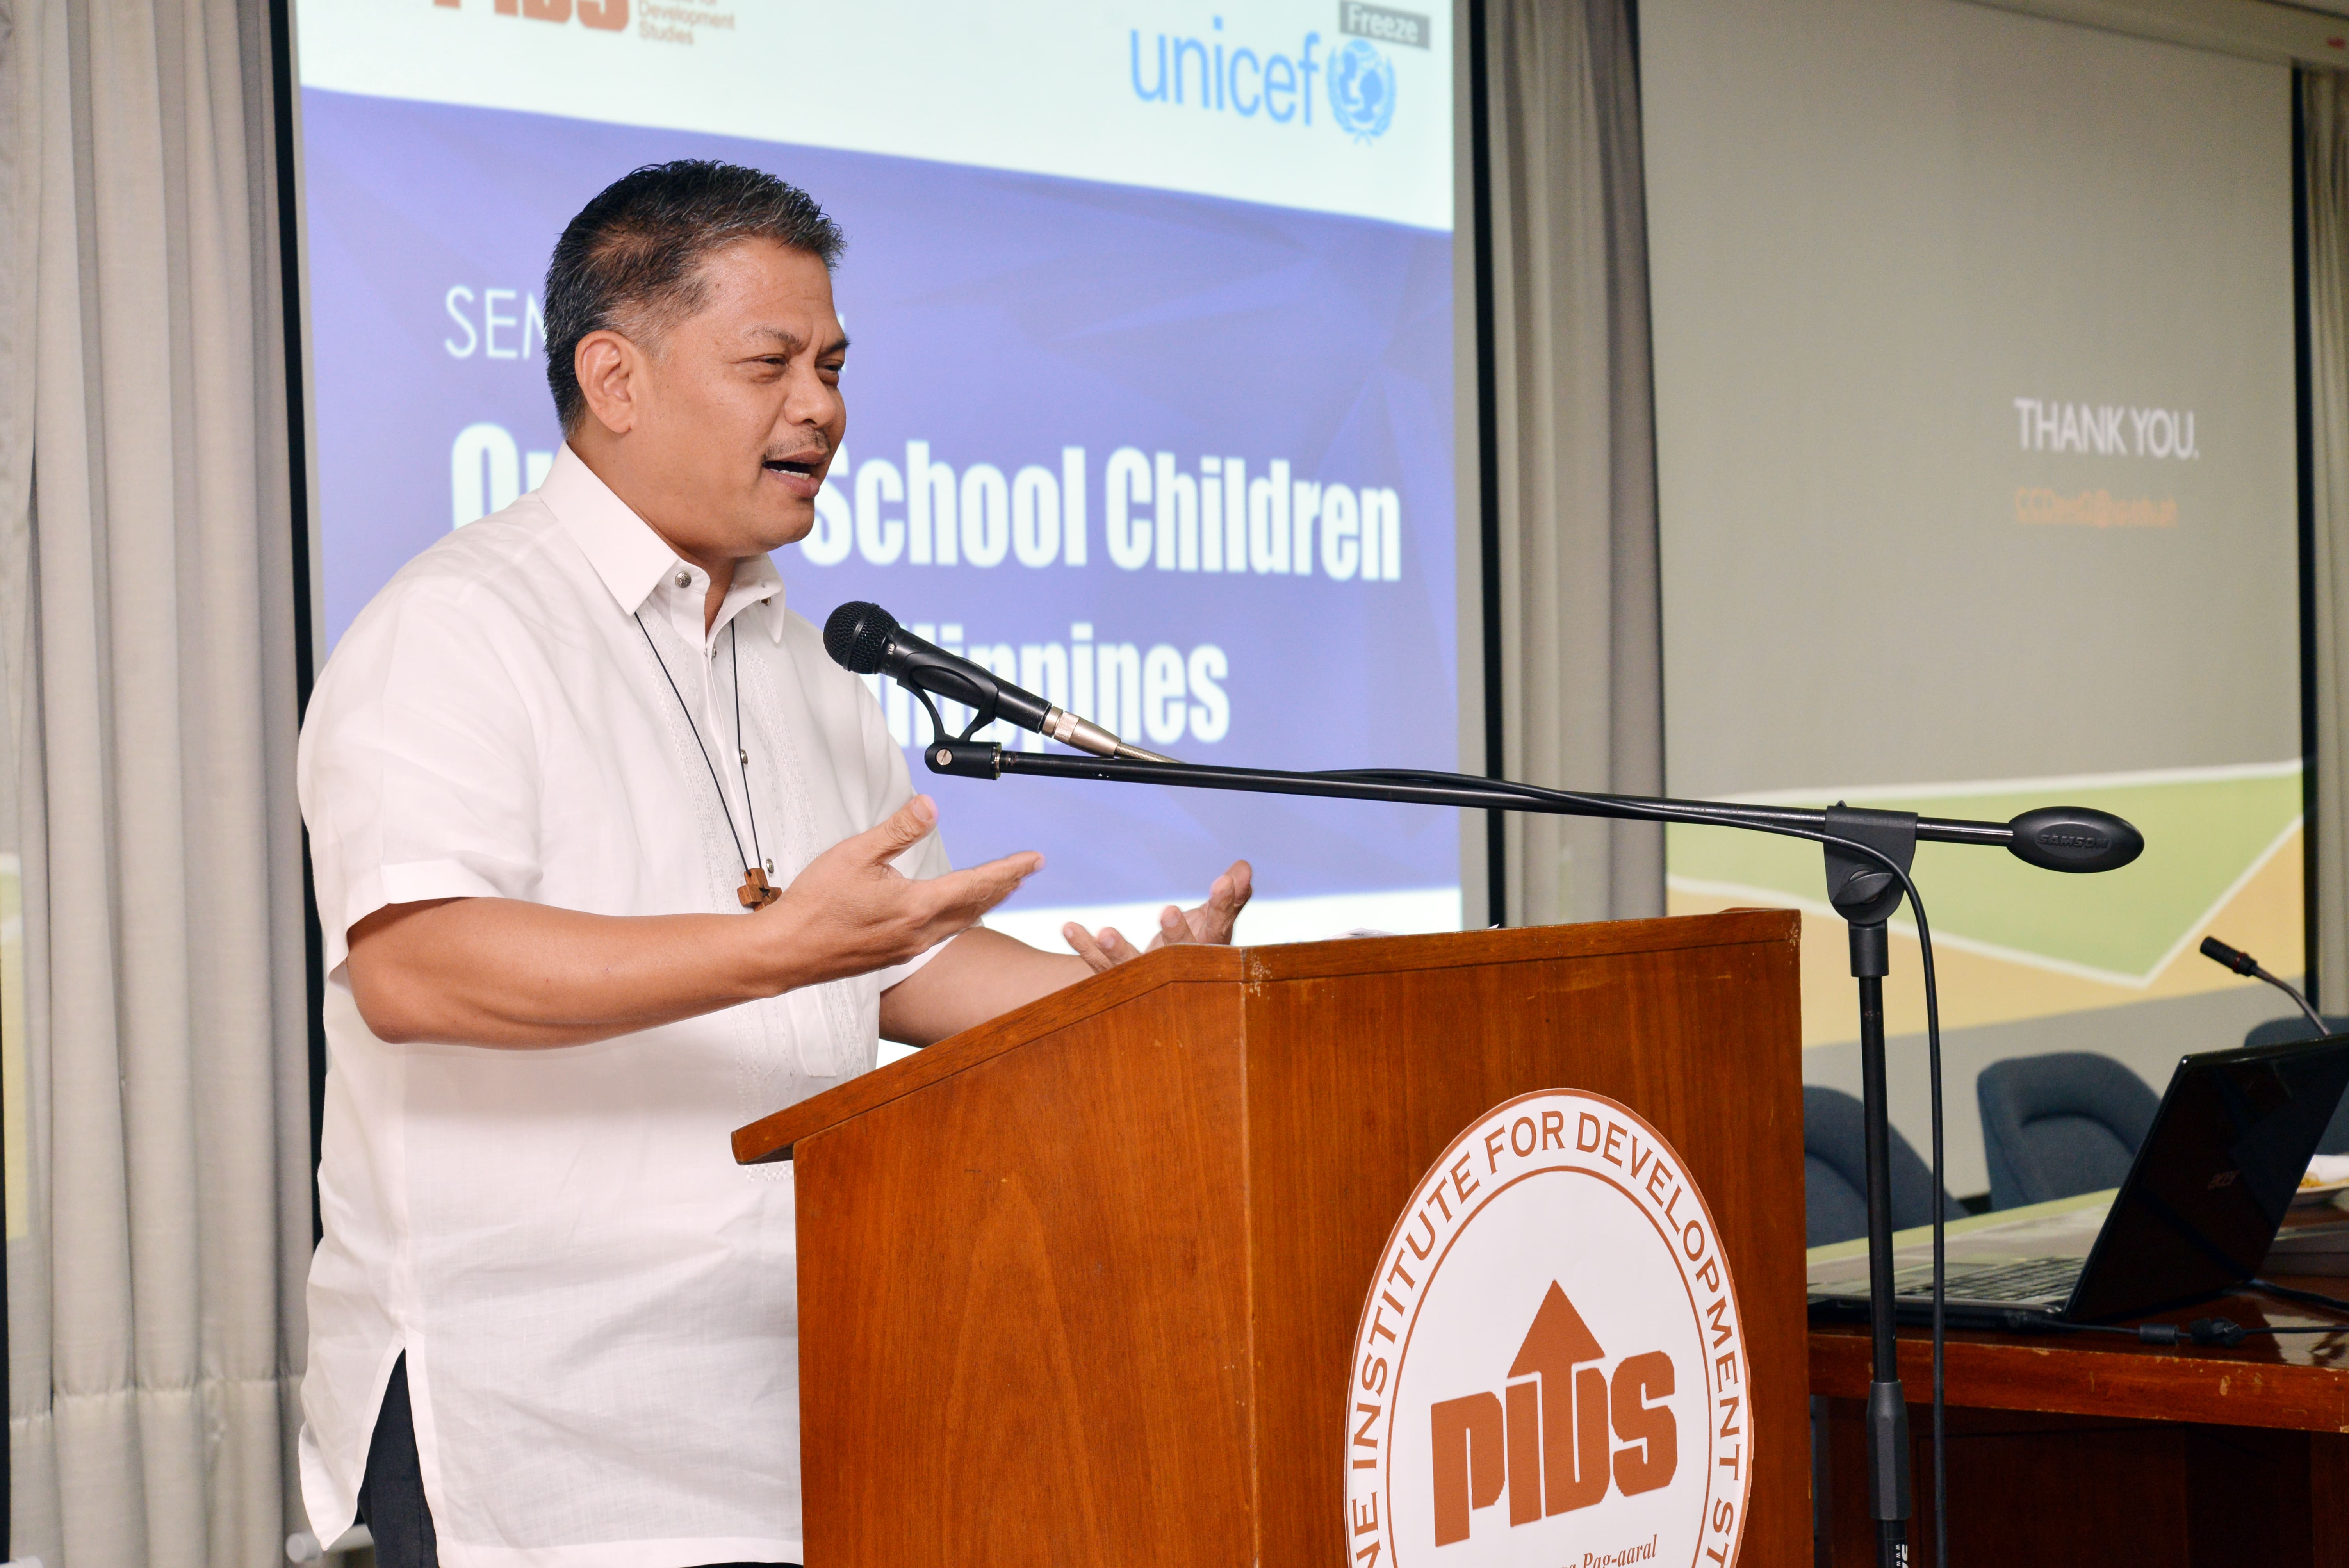 Seminar On Out-Of-School Children (OOSC) In The Philippines-DSC_3191.jpg